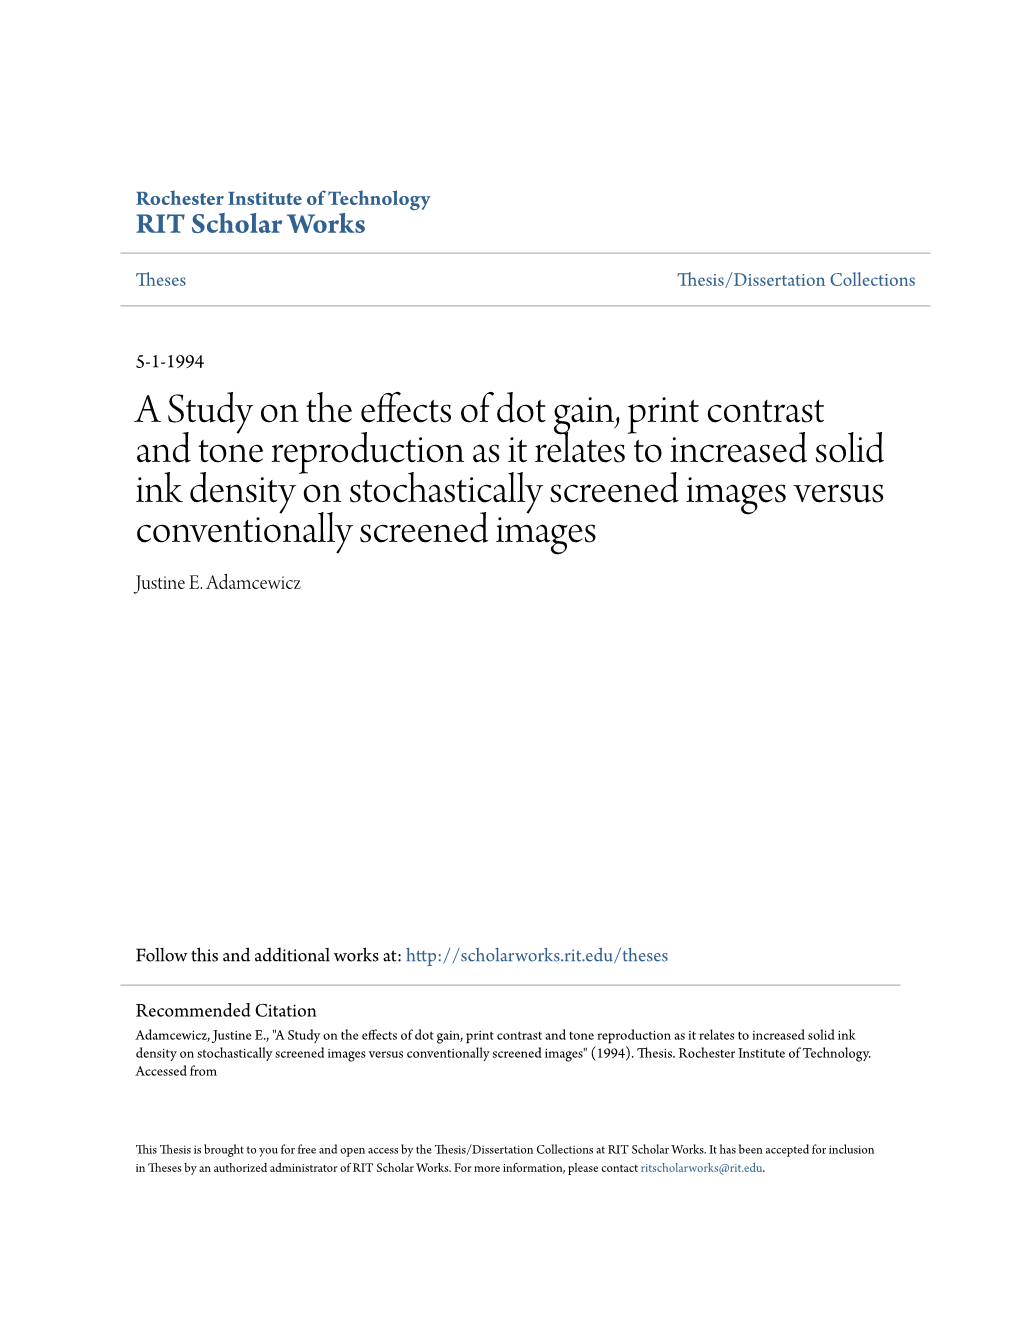 A Study on the Effects of Dot Gain, Print Contrast and Tone Reproduction As It